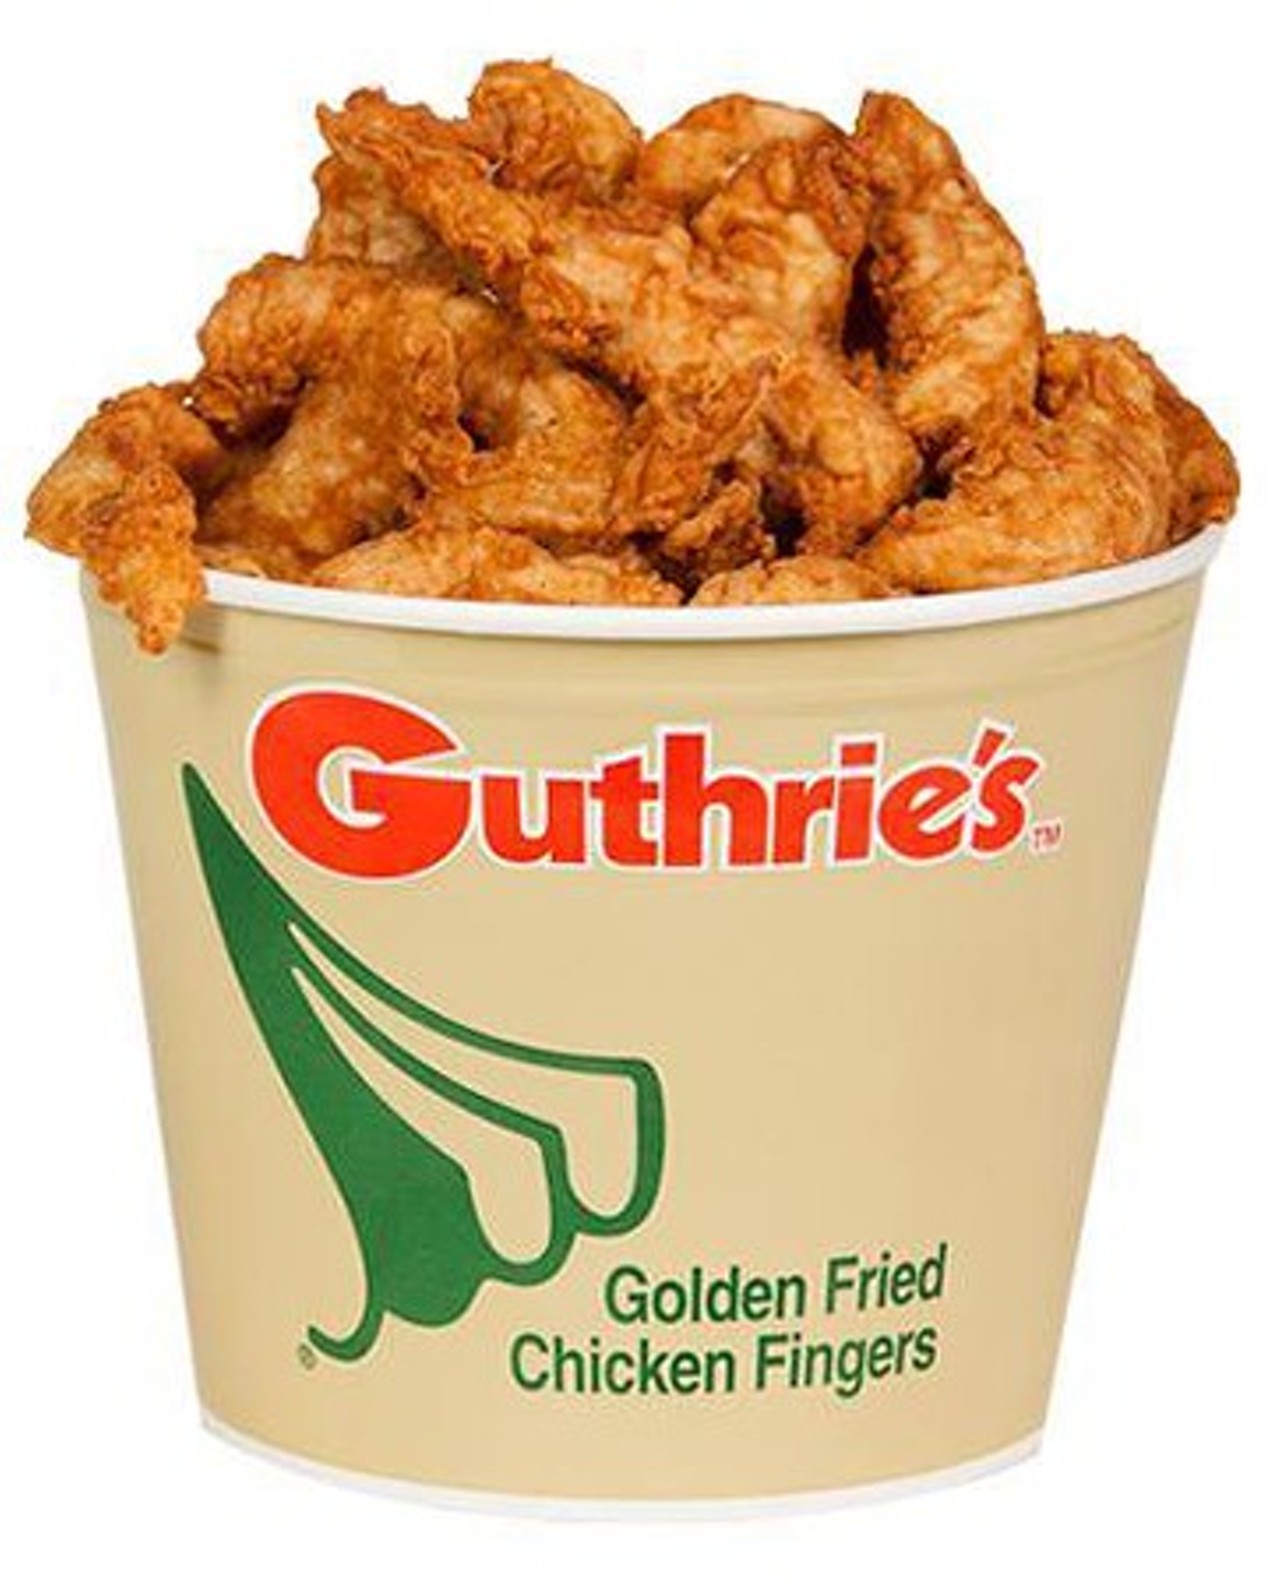 The Gutbuster Challenge
Where: Guthries' of Cleveland - 3465 Steelyard Dr.
Challenge: 30 minutes to finish an entire bucket of Guthries's famous chicken fingers. A bucket includes 25 chicken fingers.
Prize: Trophy and your picture on their Facebook page.
Cost: $23.99